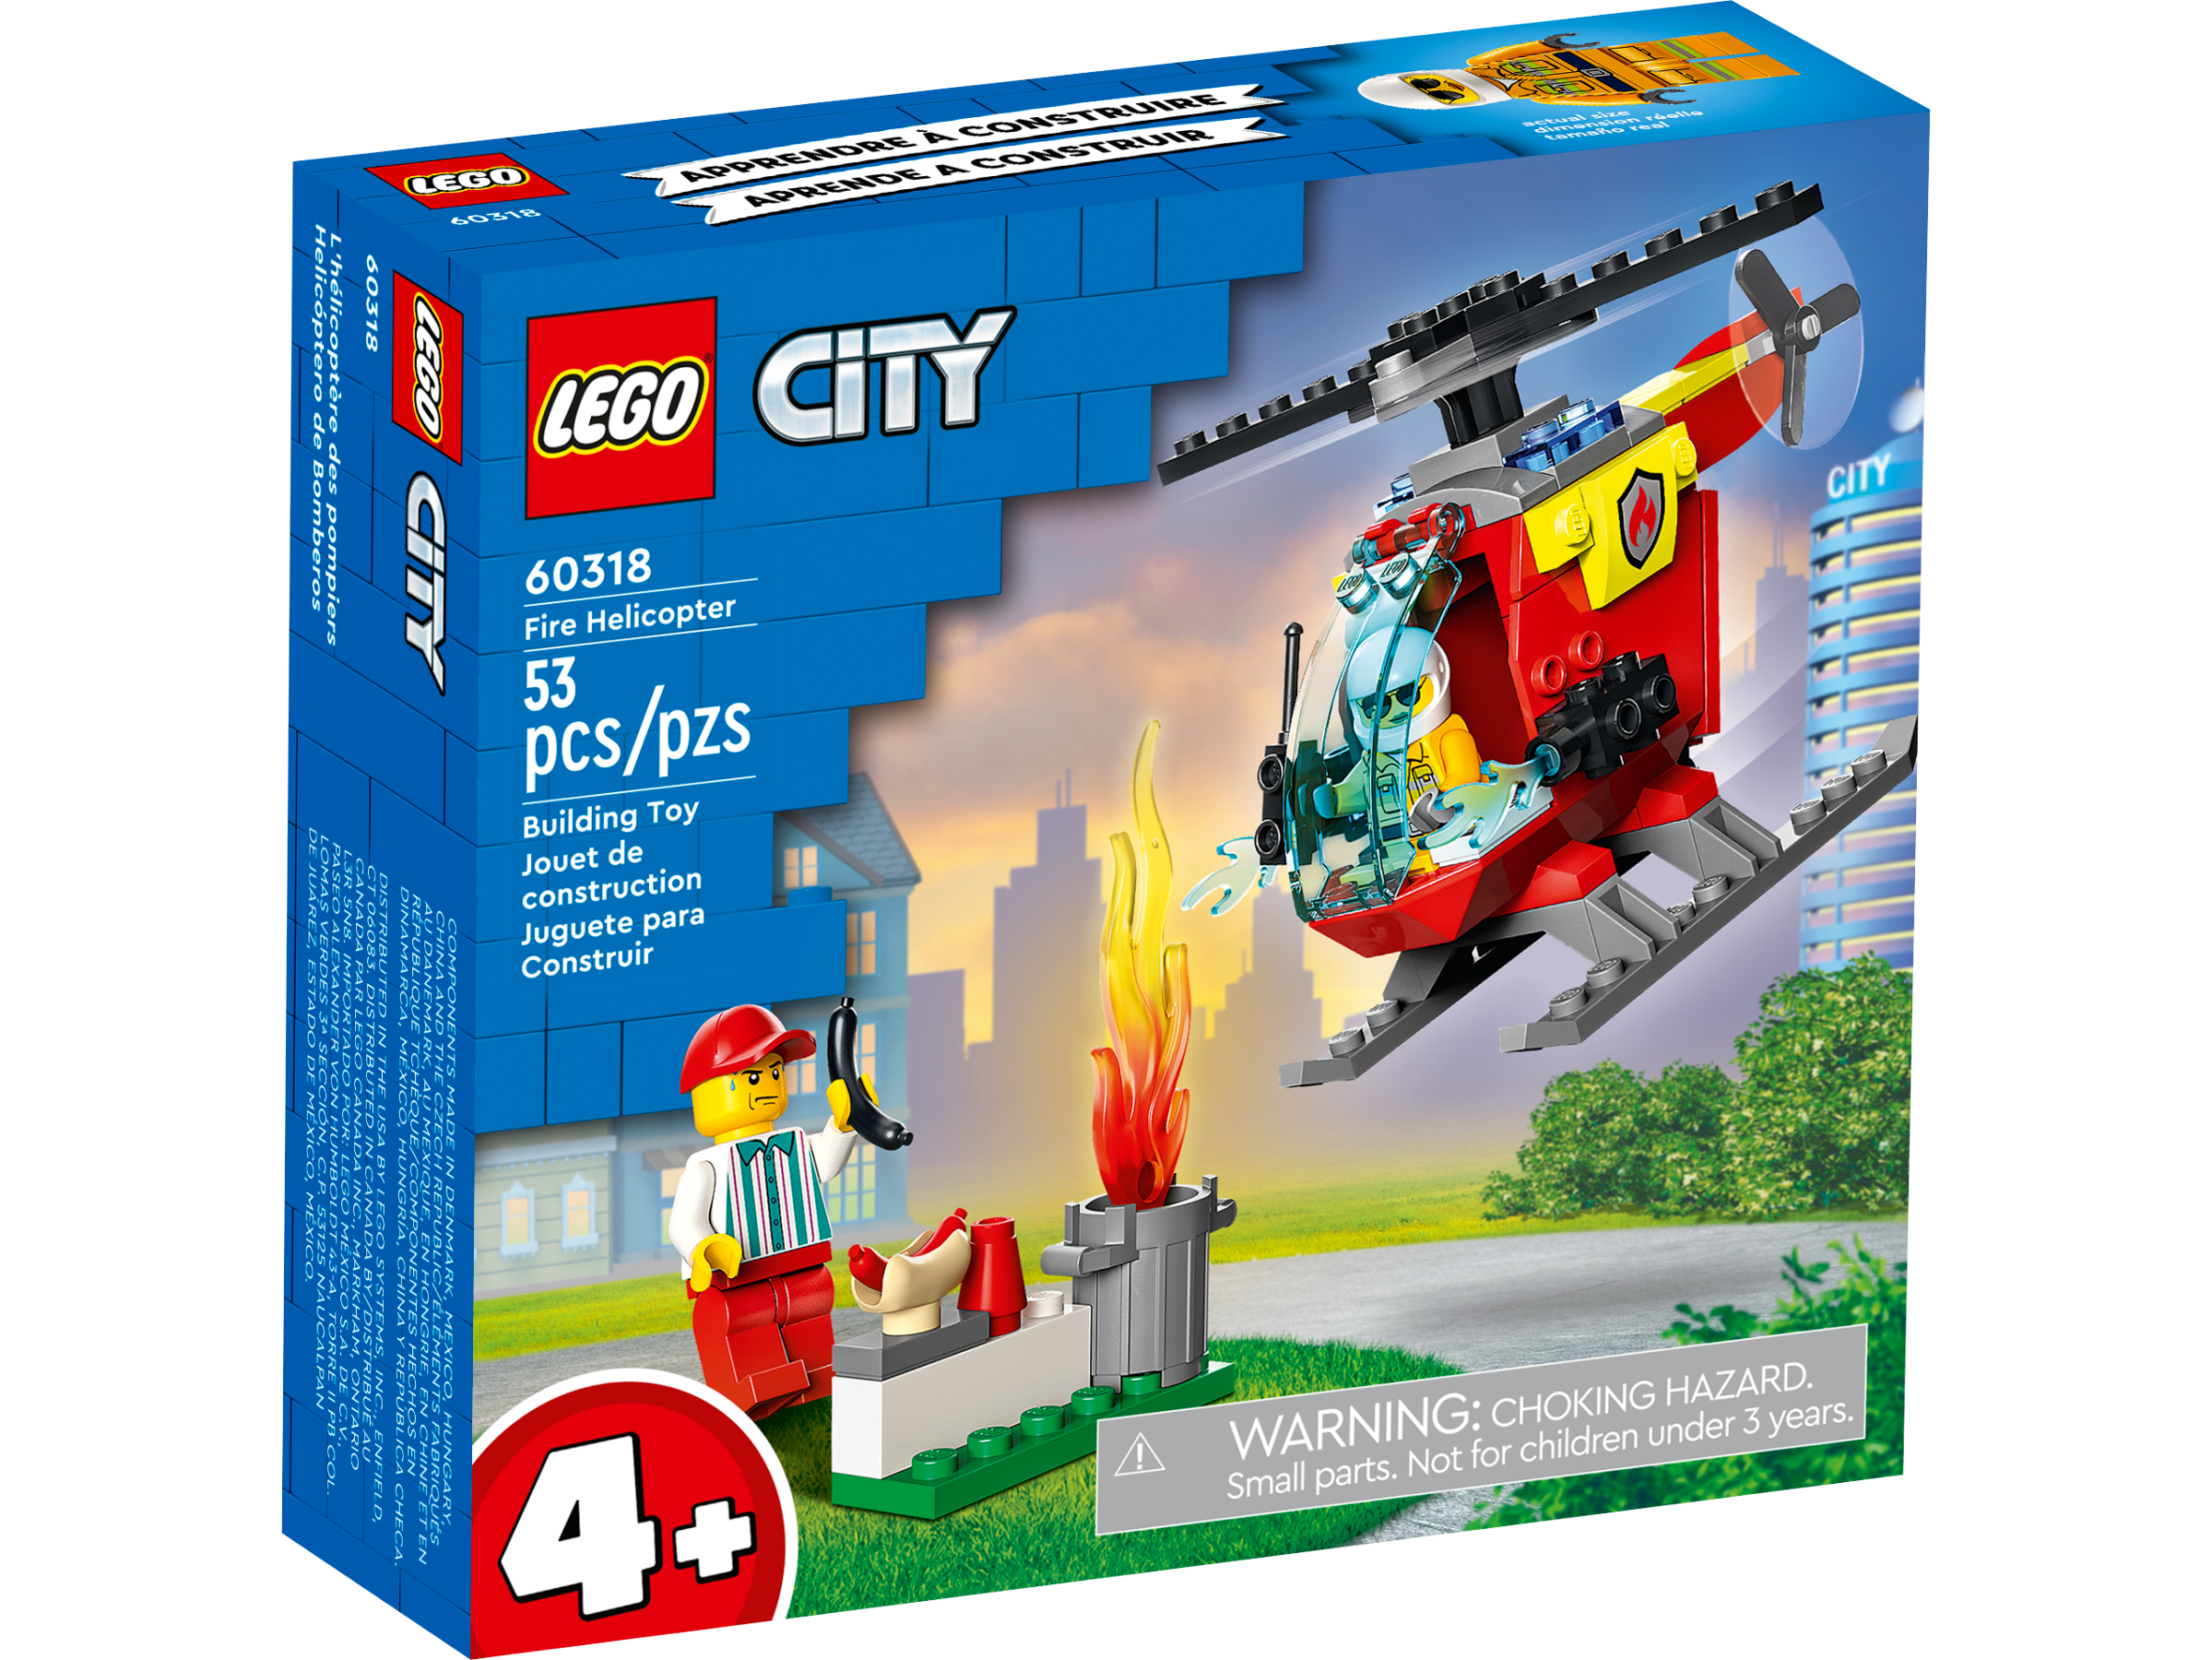 Bread and 2 Hotdog Elements Including Toy Walkie-Talkie LEGO City Fire Helicopter 60318 Building Kit for Kids Aged 4+; Includes Firefighter and Vendor Minifigures with Accessories 53 Pieces 